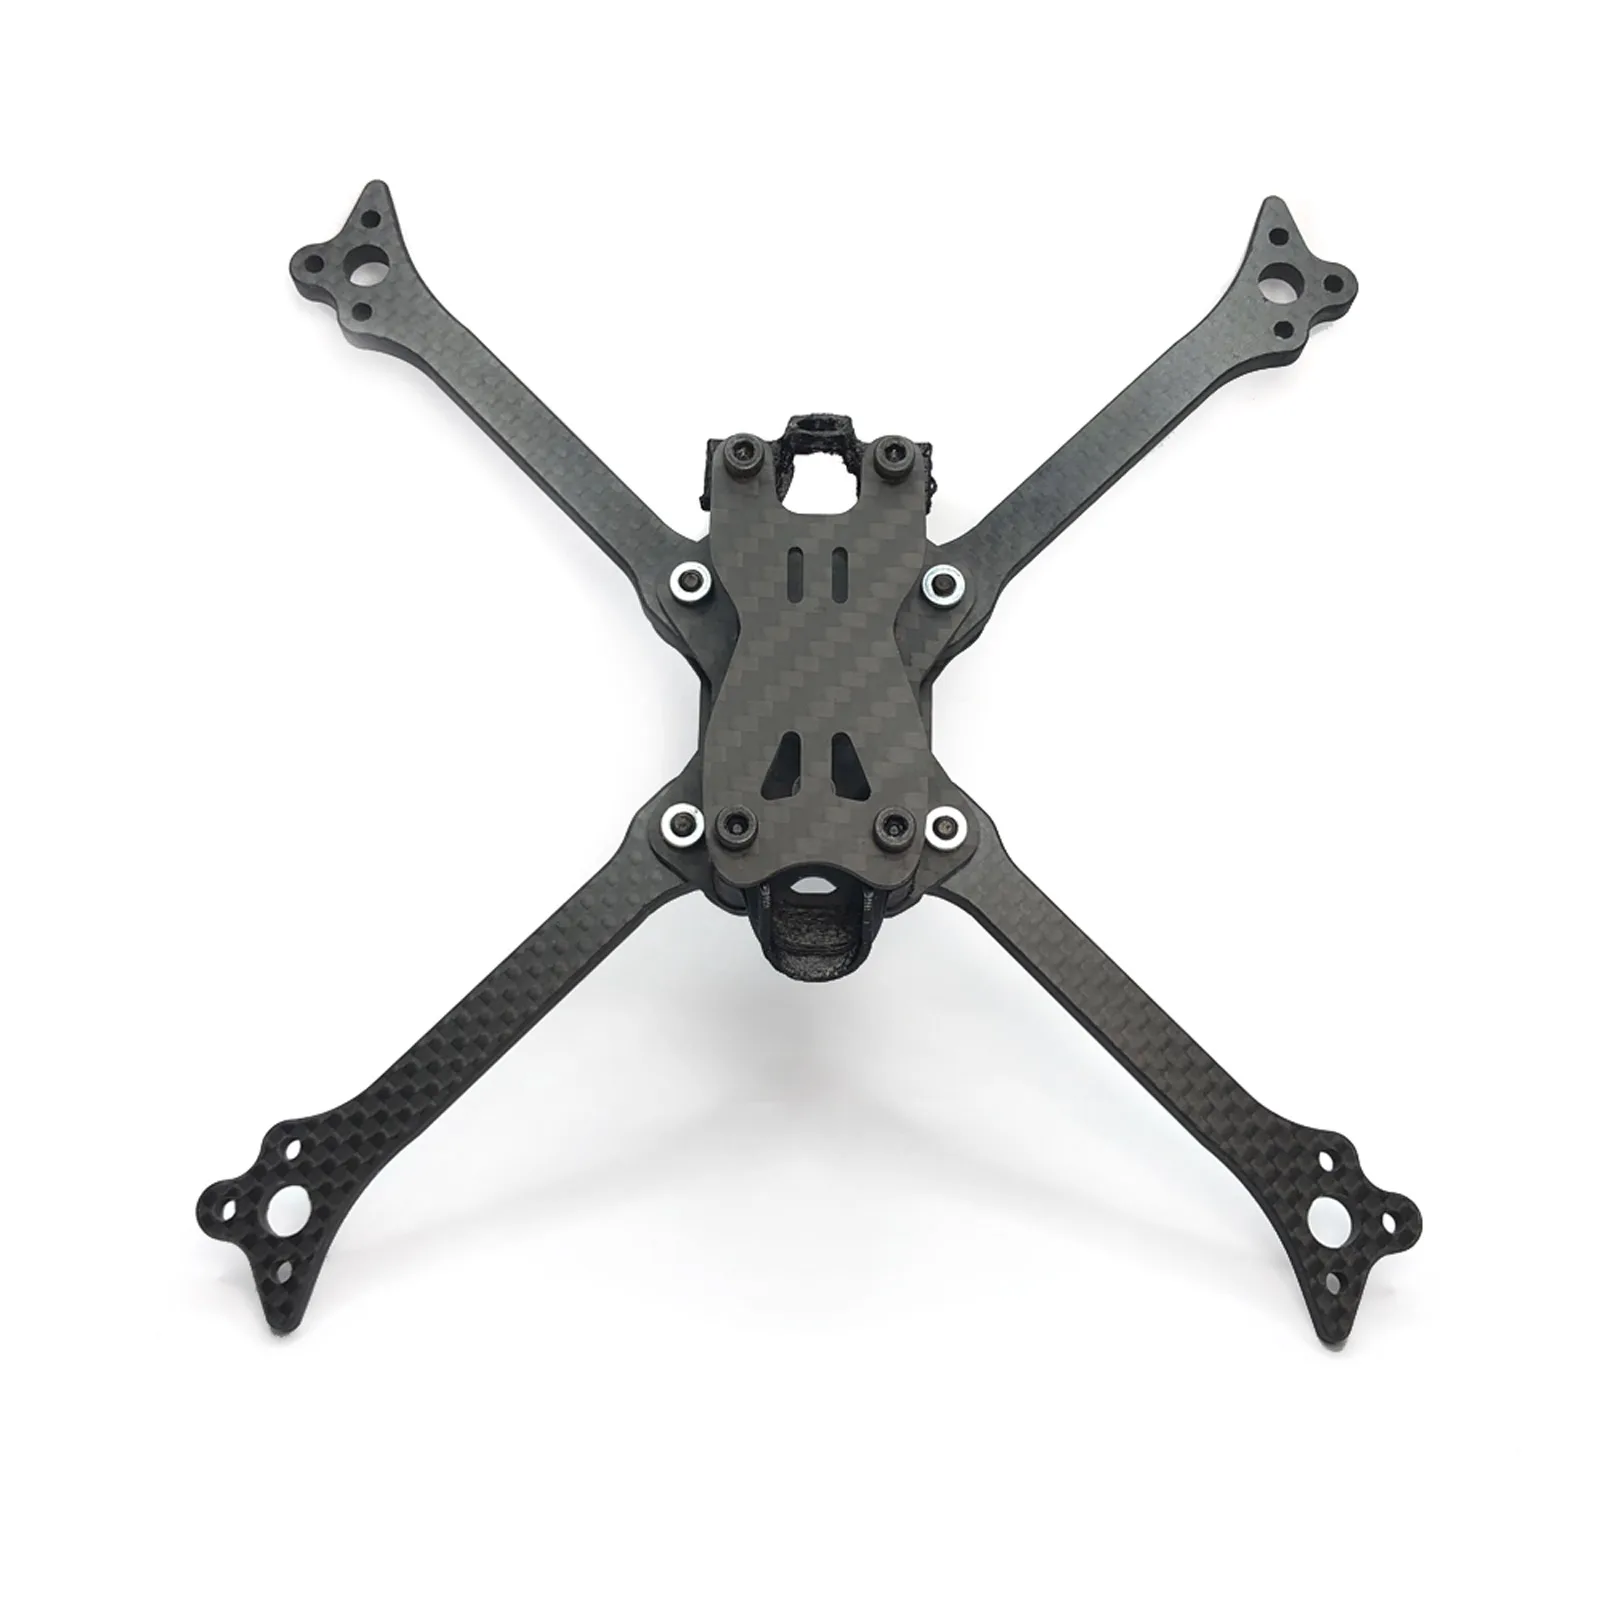 

533 200mm 5inch Carbon Fiber X-type Split Frame Kit with 5mm Arms for five33 FPV RC Quadcopter Drone